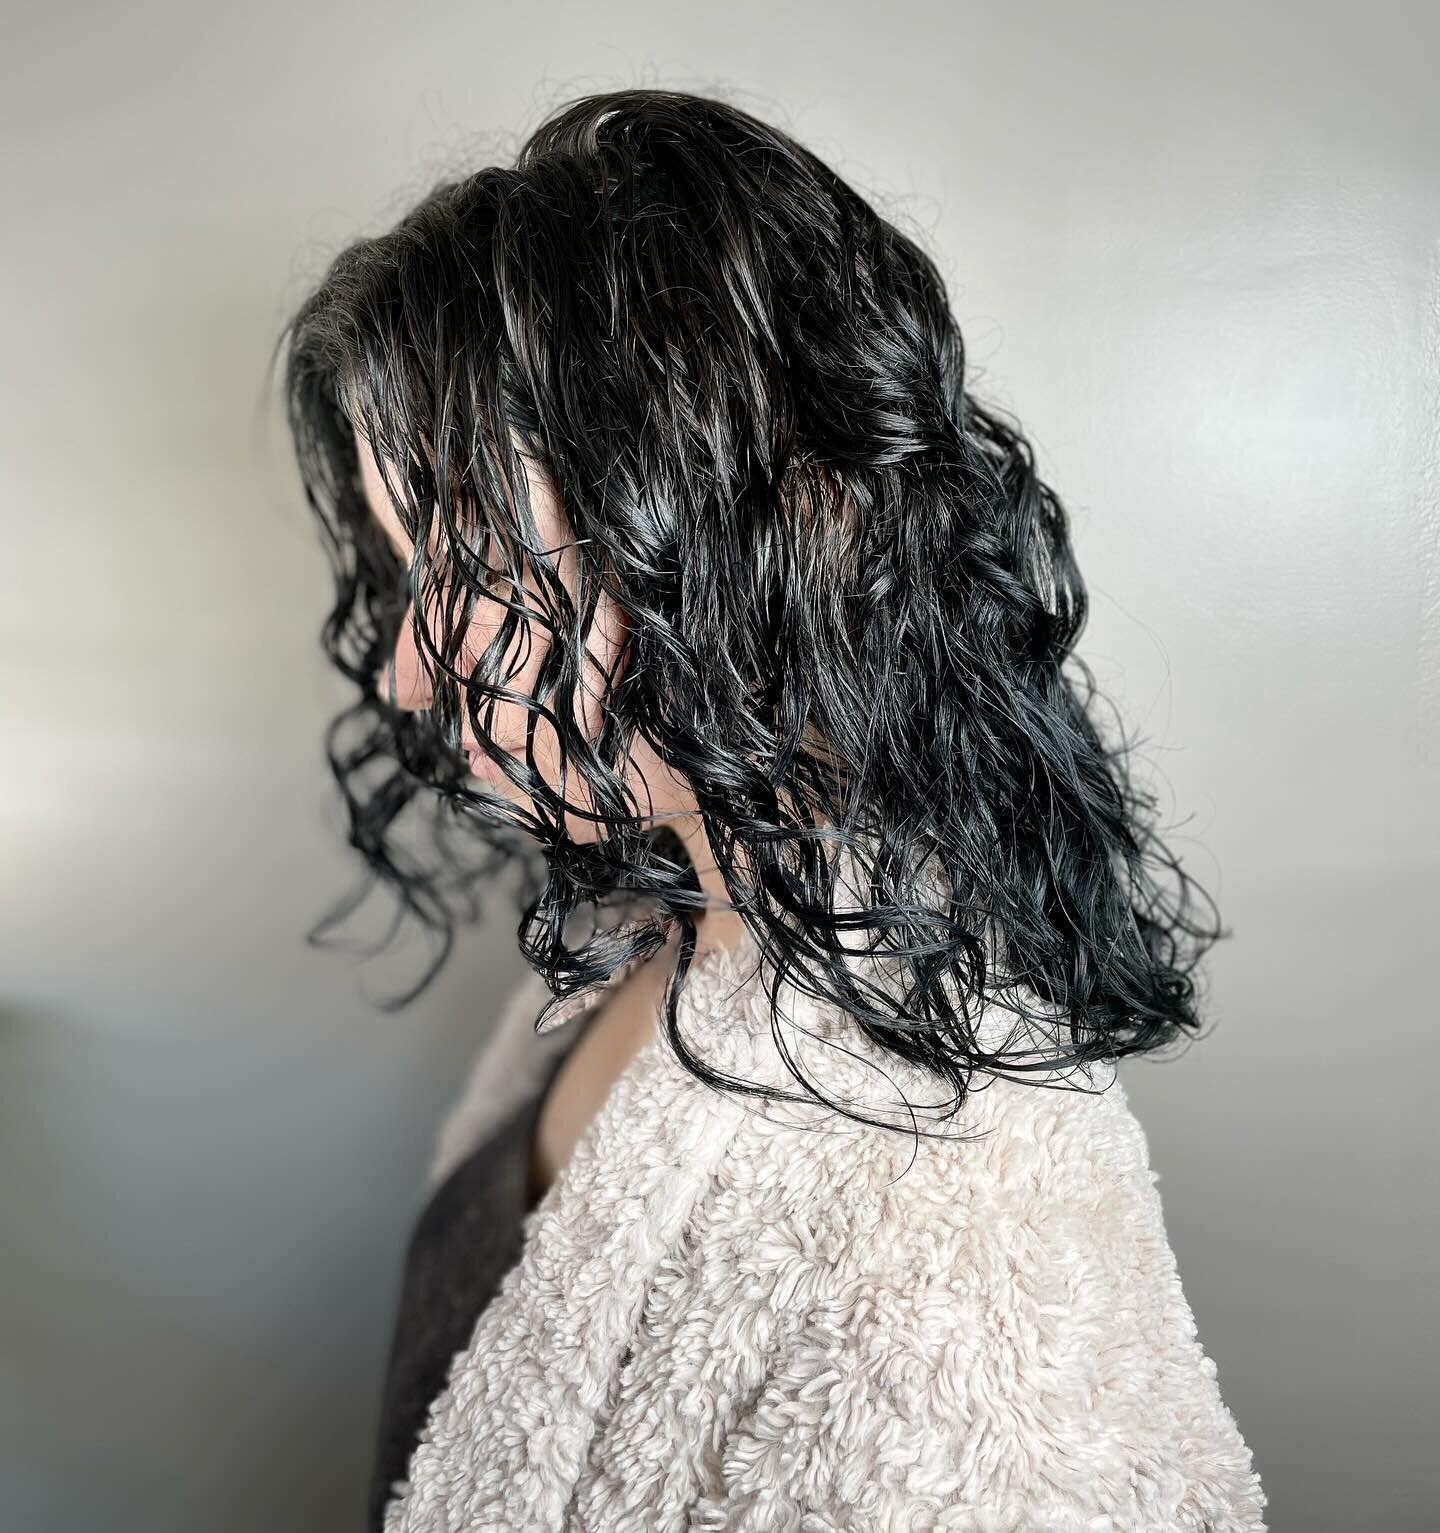 Diving into the deep hues of blue-black curls &ndash; because life is too short for ordinary hair. Unleash the magic, embrace the curls! 💙🌀✨ 

.
.
.
.
.
.
#salon6
#broadripple
#broadripplesalon
#broadripplehair
#villagepeople
#euforapro
#salontoday